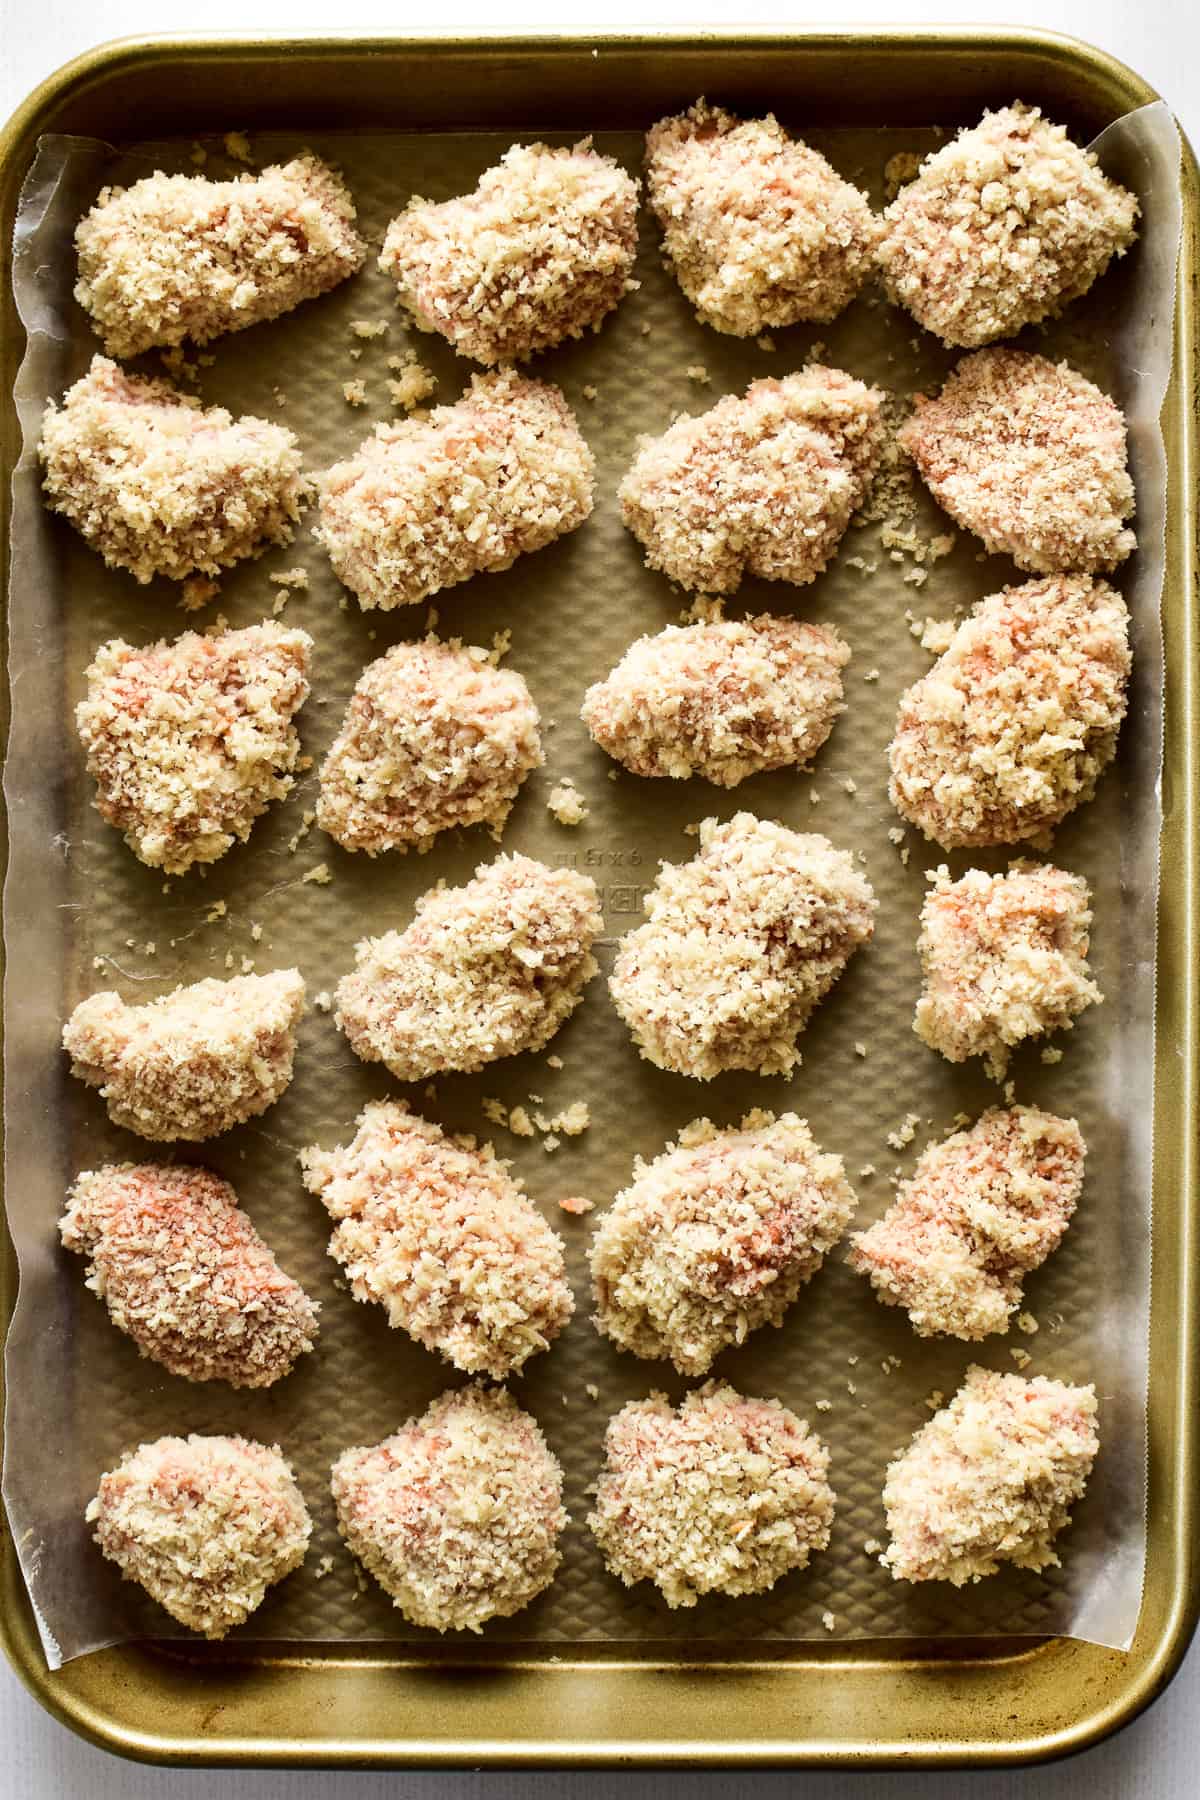 Panko-coated chicken nuggets on a baking sheet